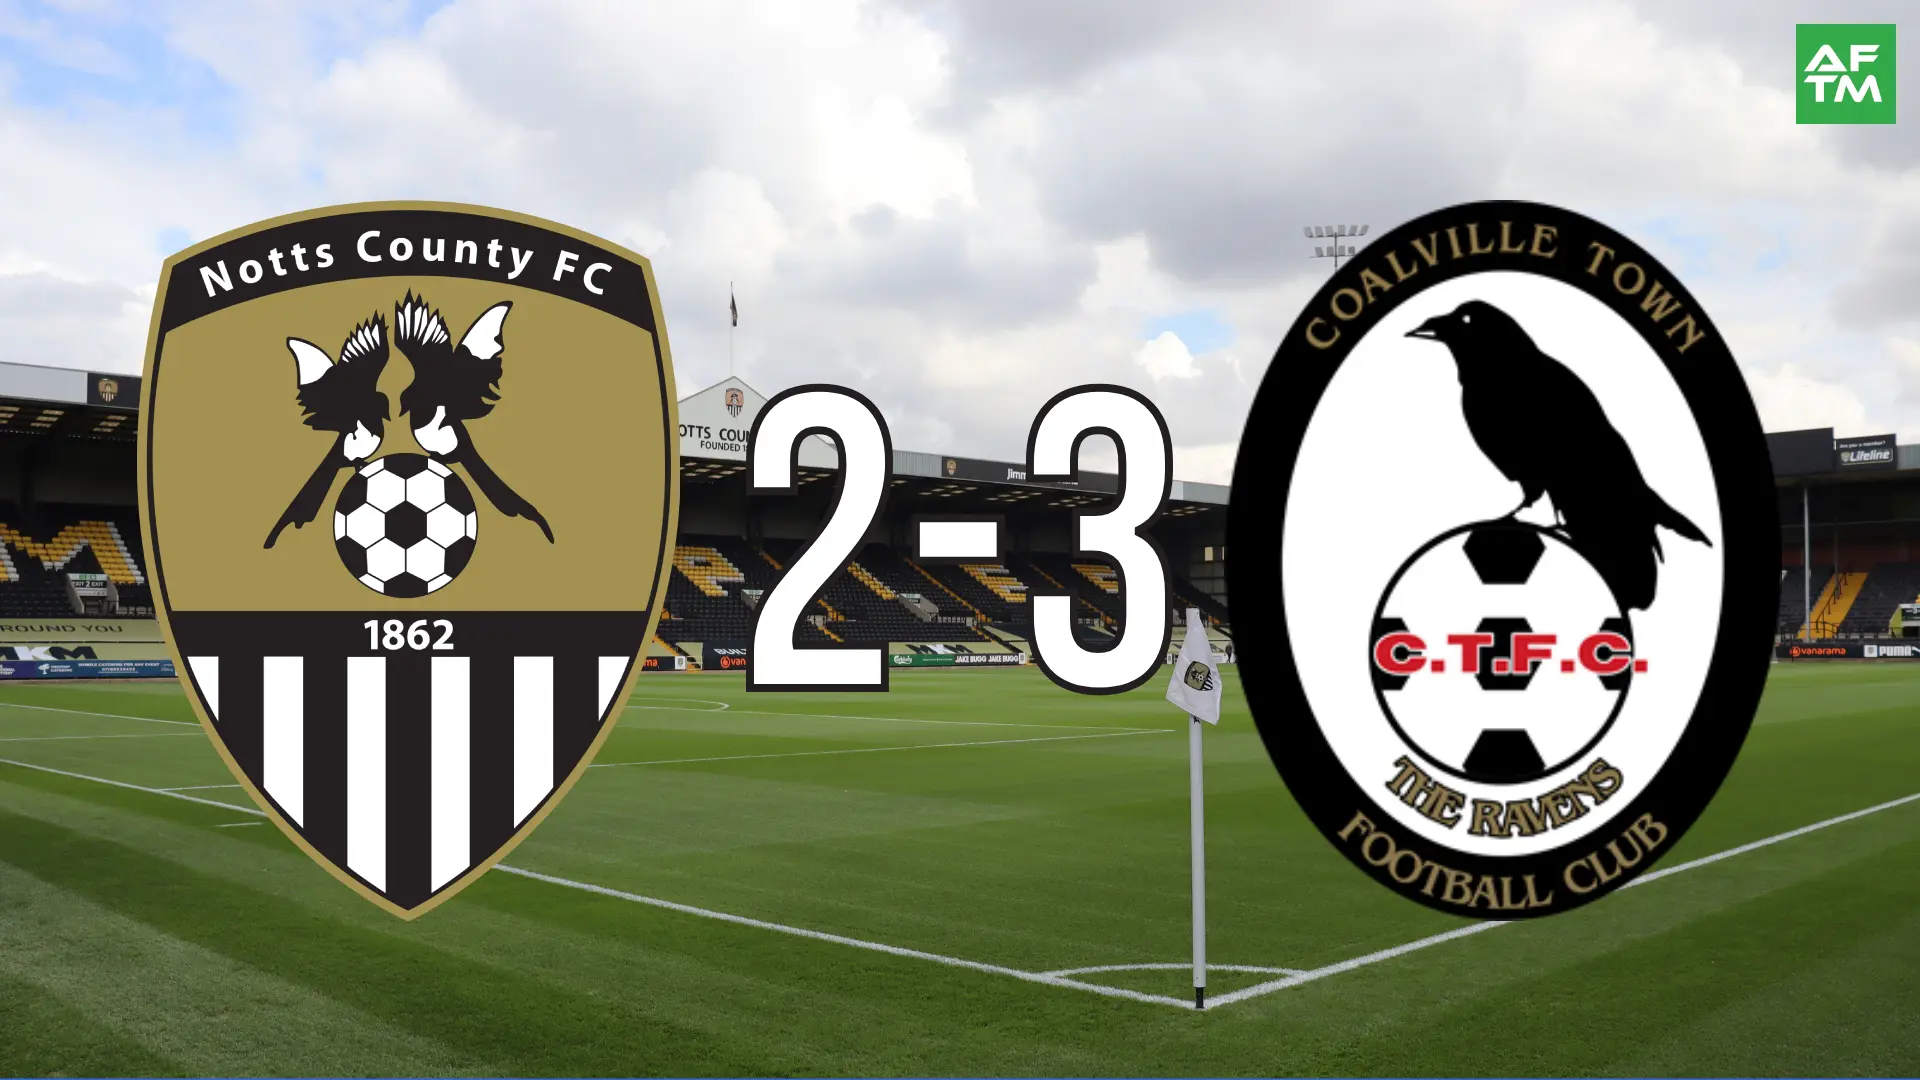 The Ravens Triumphed in the Clash of the Corvids but who are Coalville Town FC? 